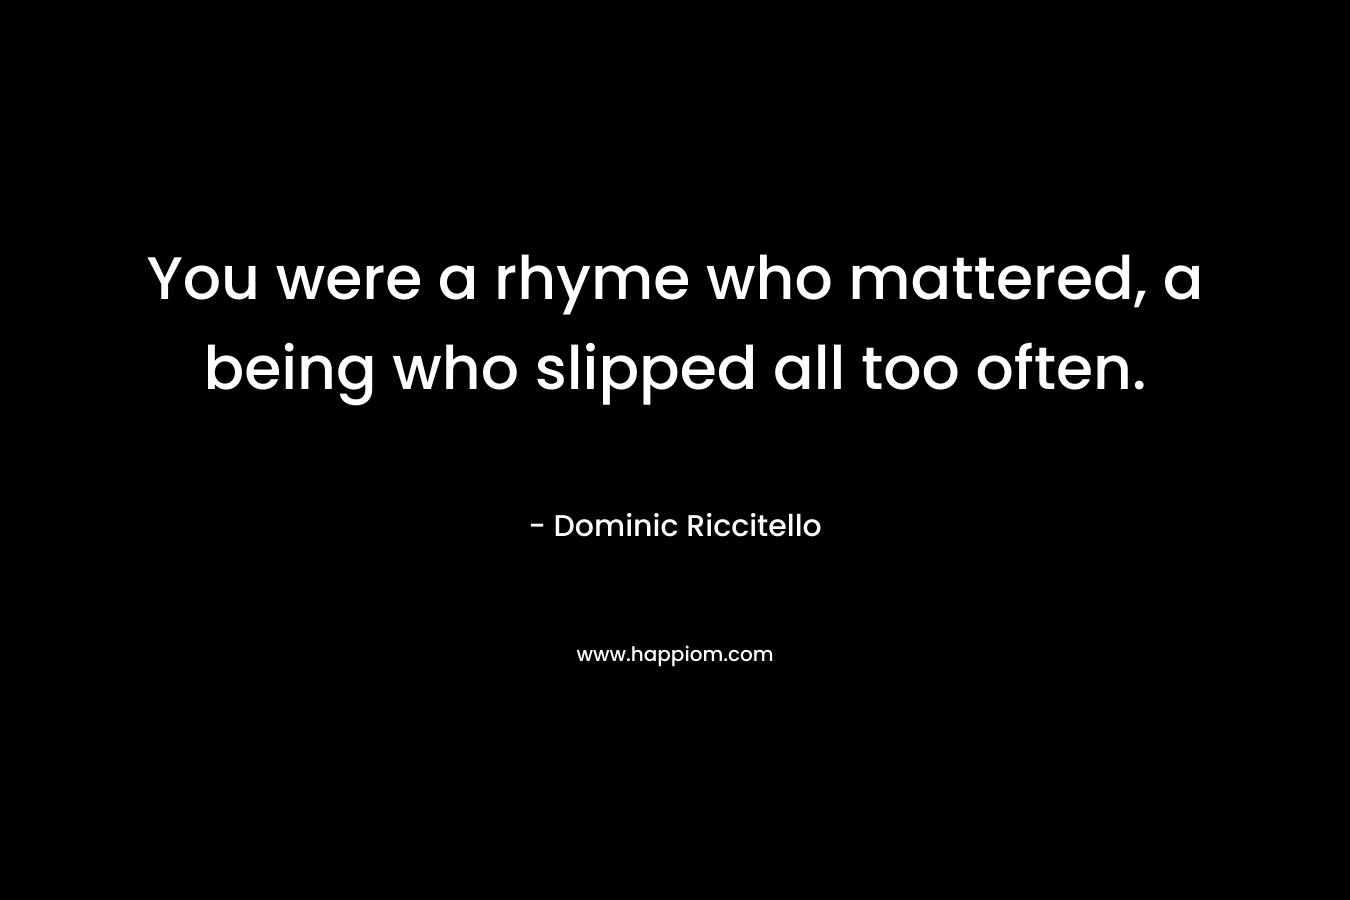 You were a rhyme who mattered, a being who slipped all too often. – Dominic Riccitello